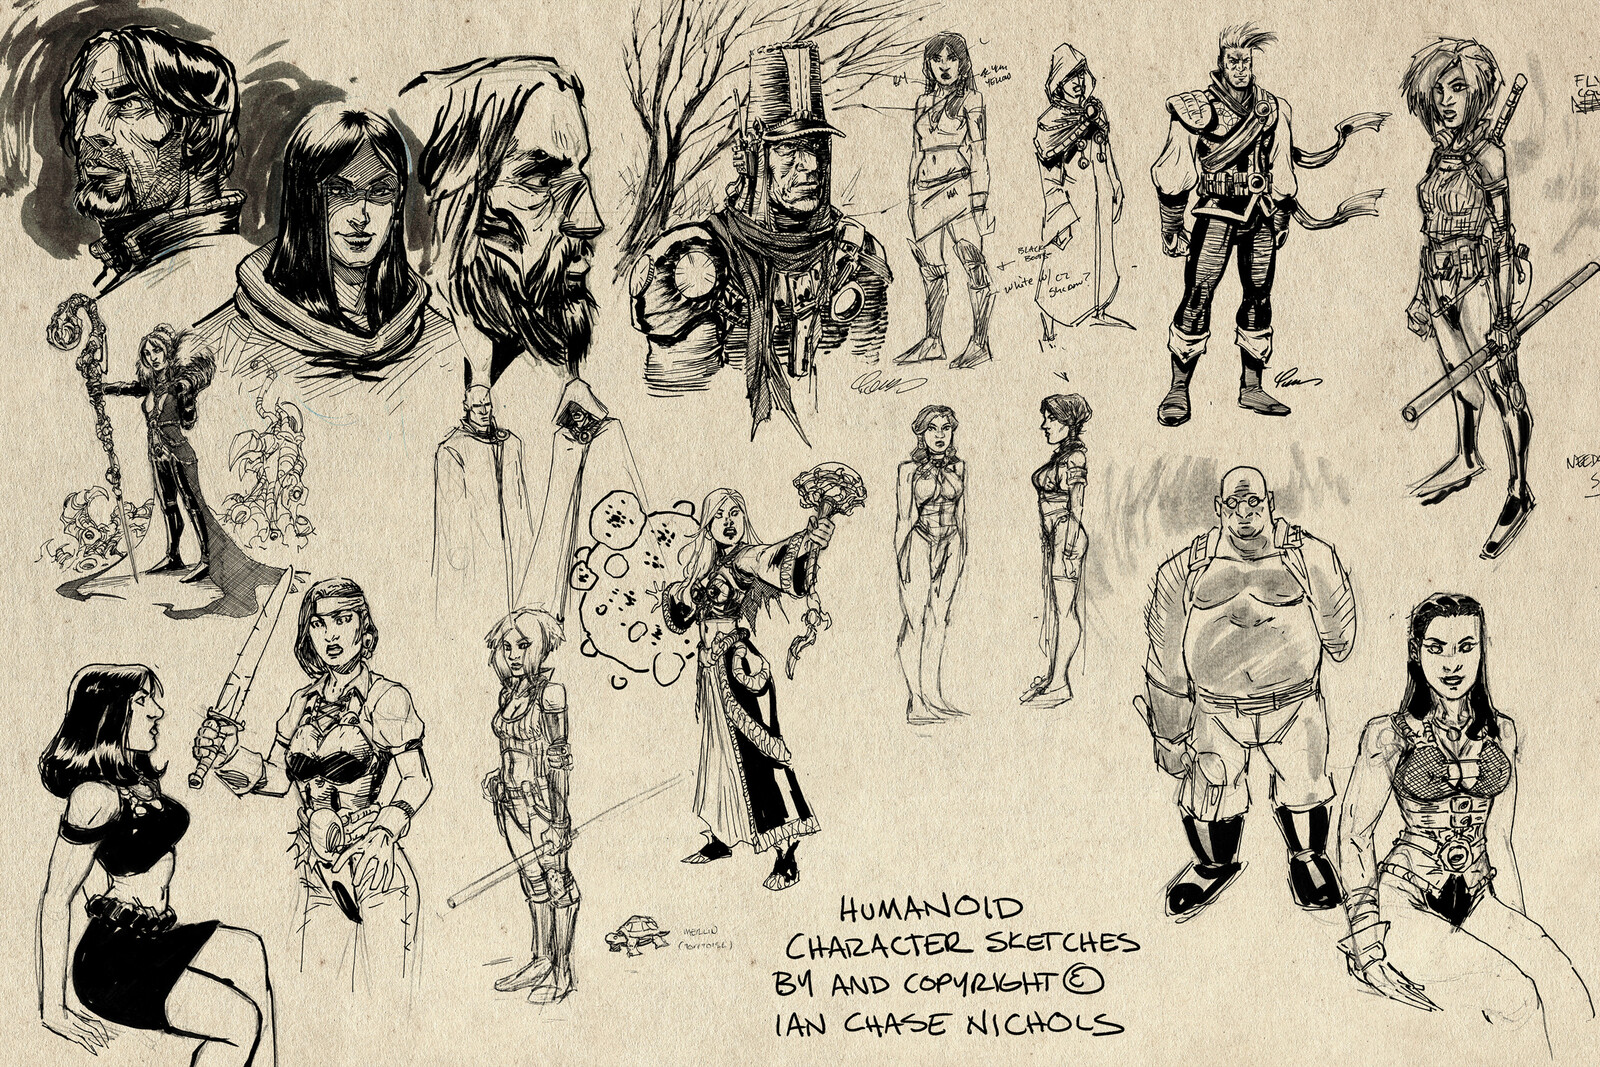 Another sampling from my stacks of sketchbooks filled with characters and ideas. © Ian Chase Nichols